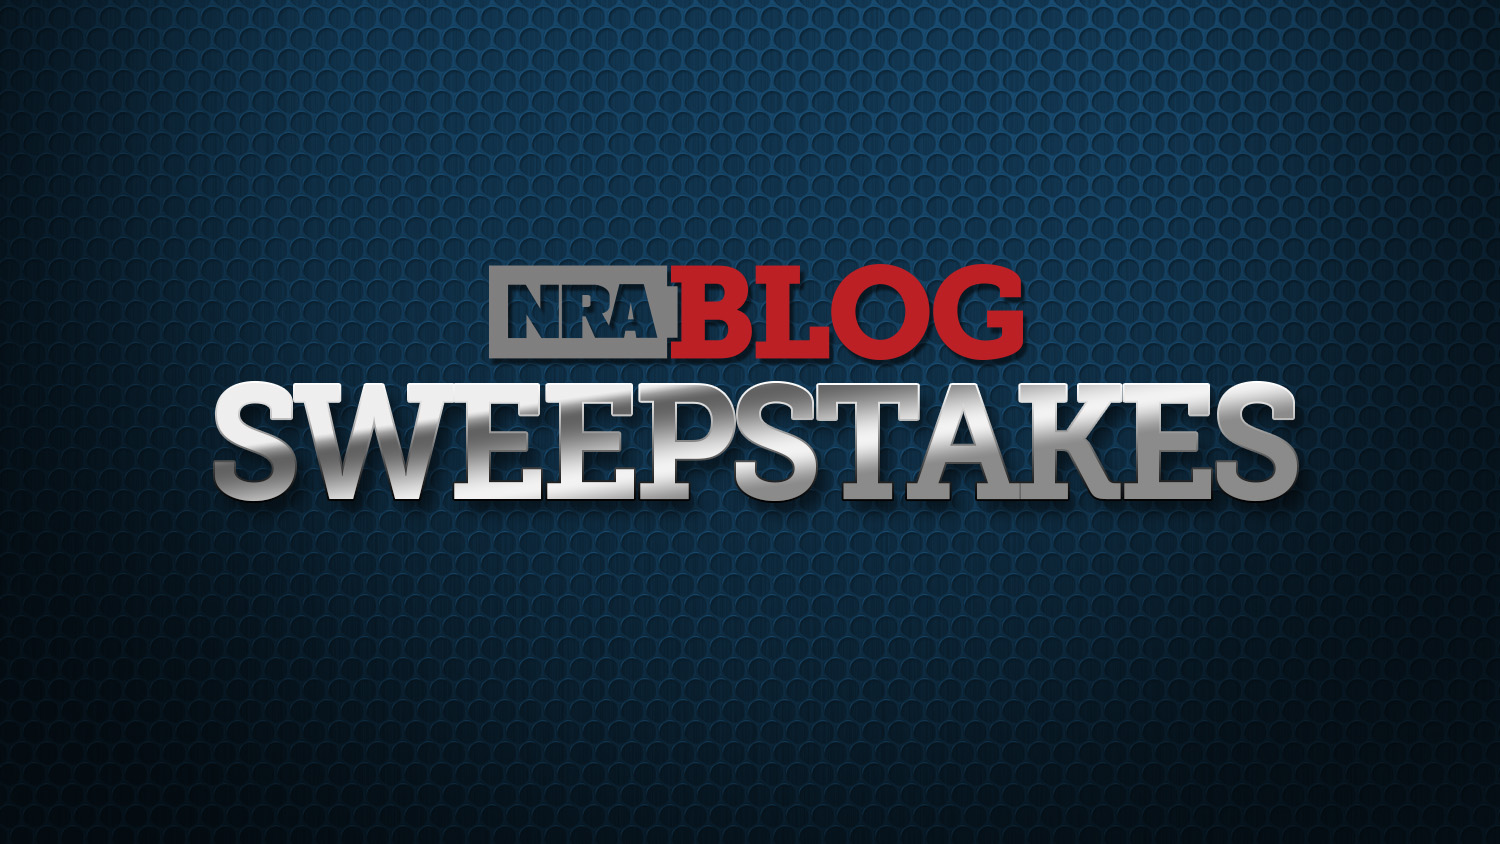 Enter To Win The NRA Blog September Sweepstakes!